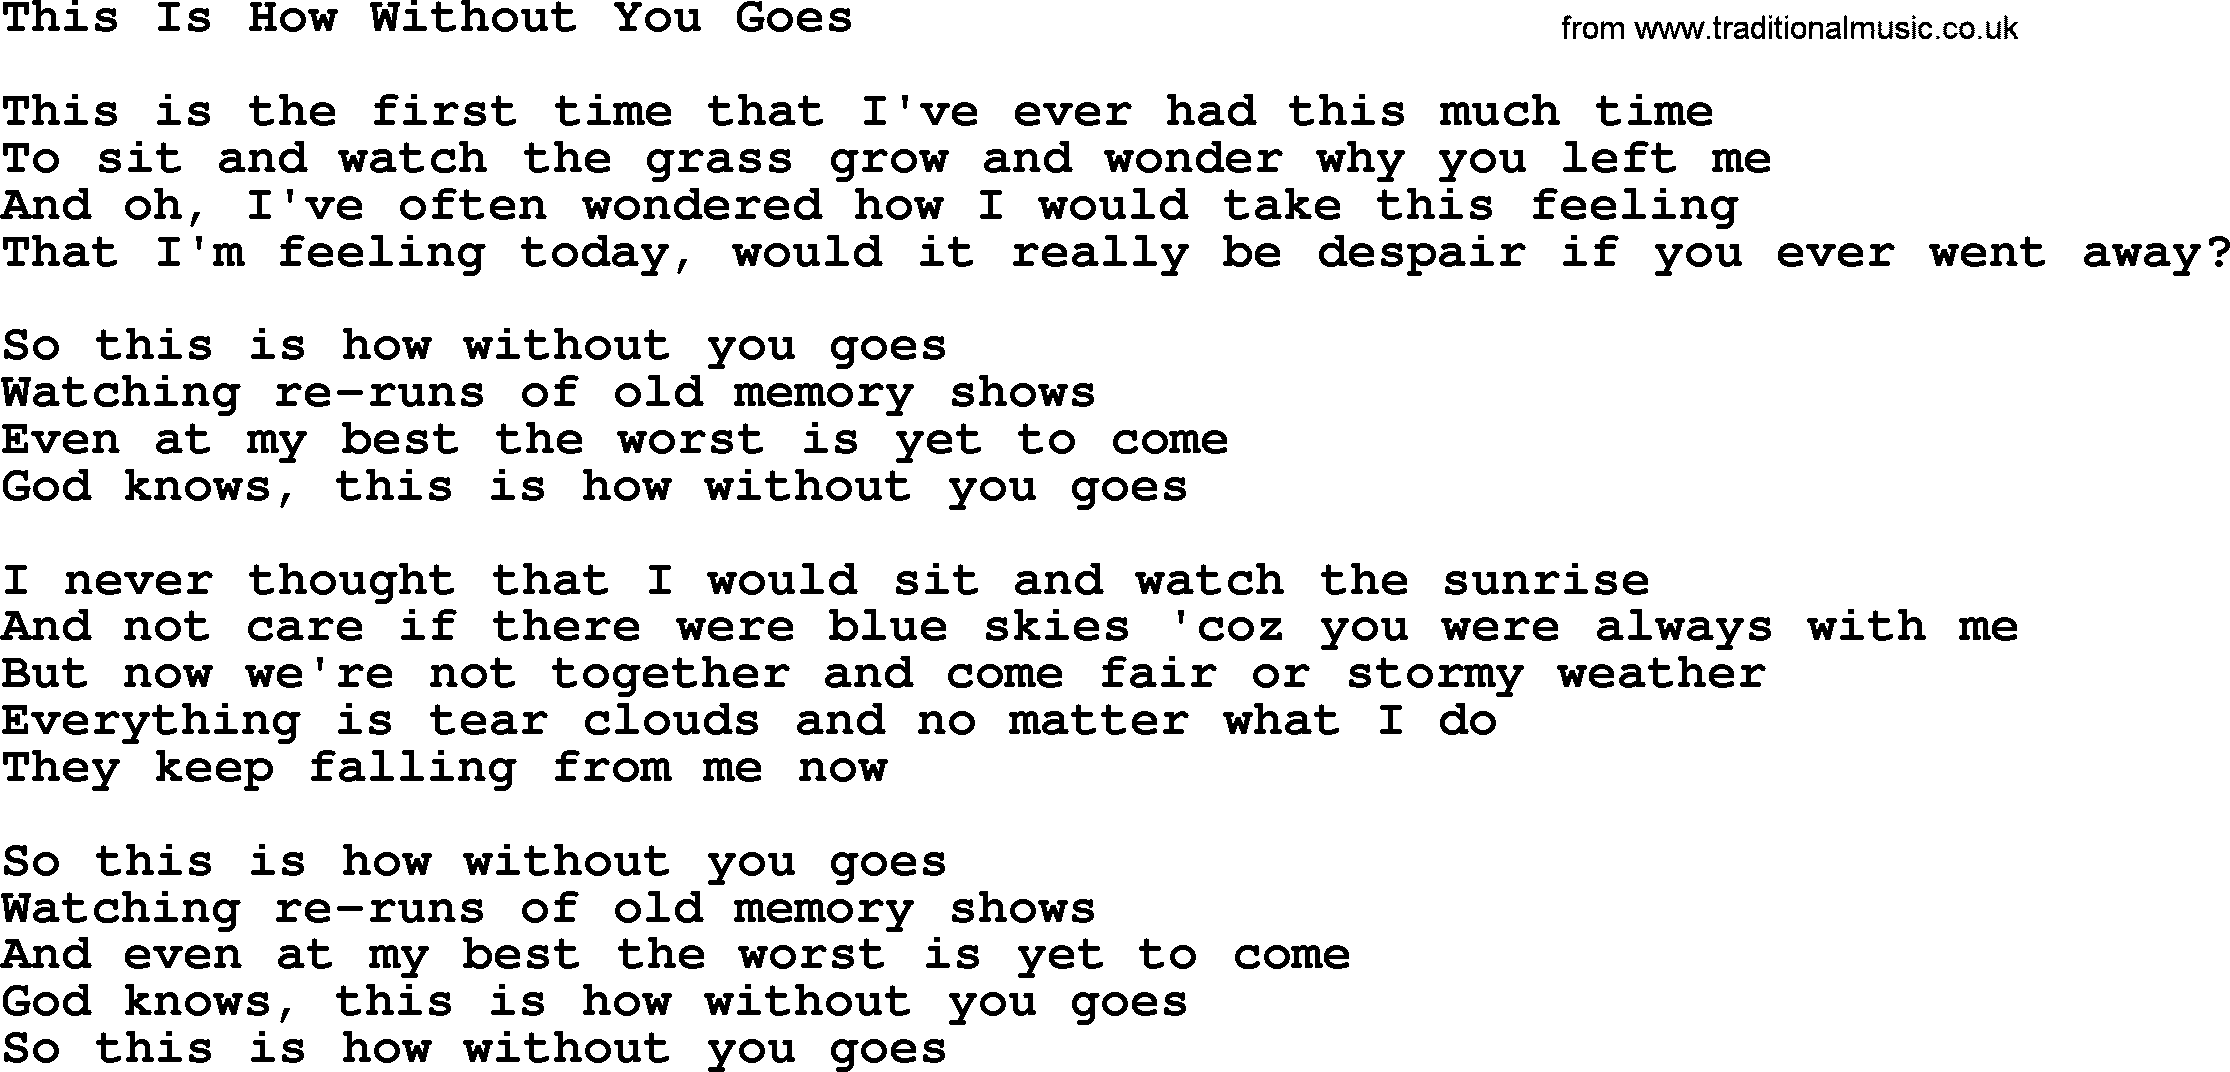 Willie Nelson song: This Is How Without You Goes lyrics